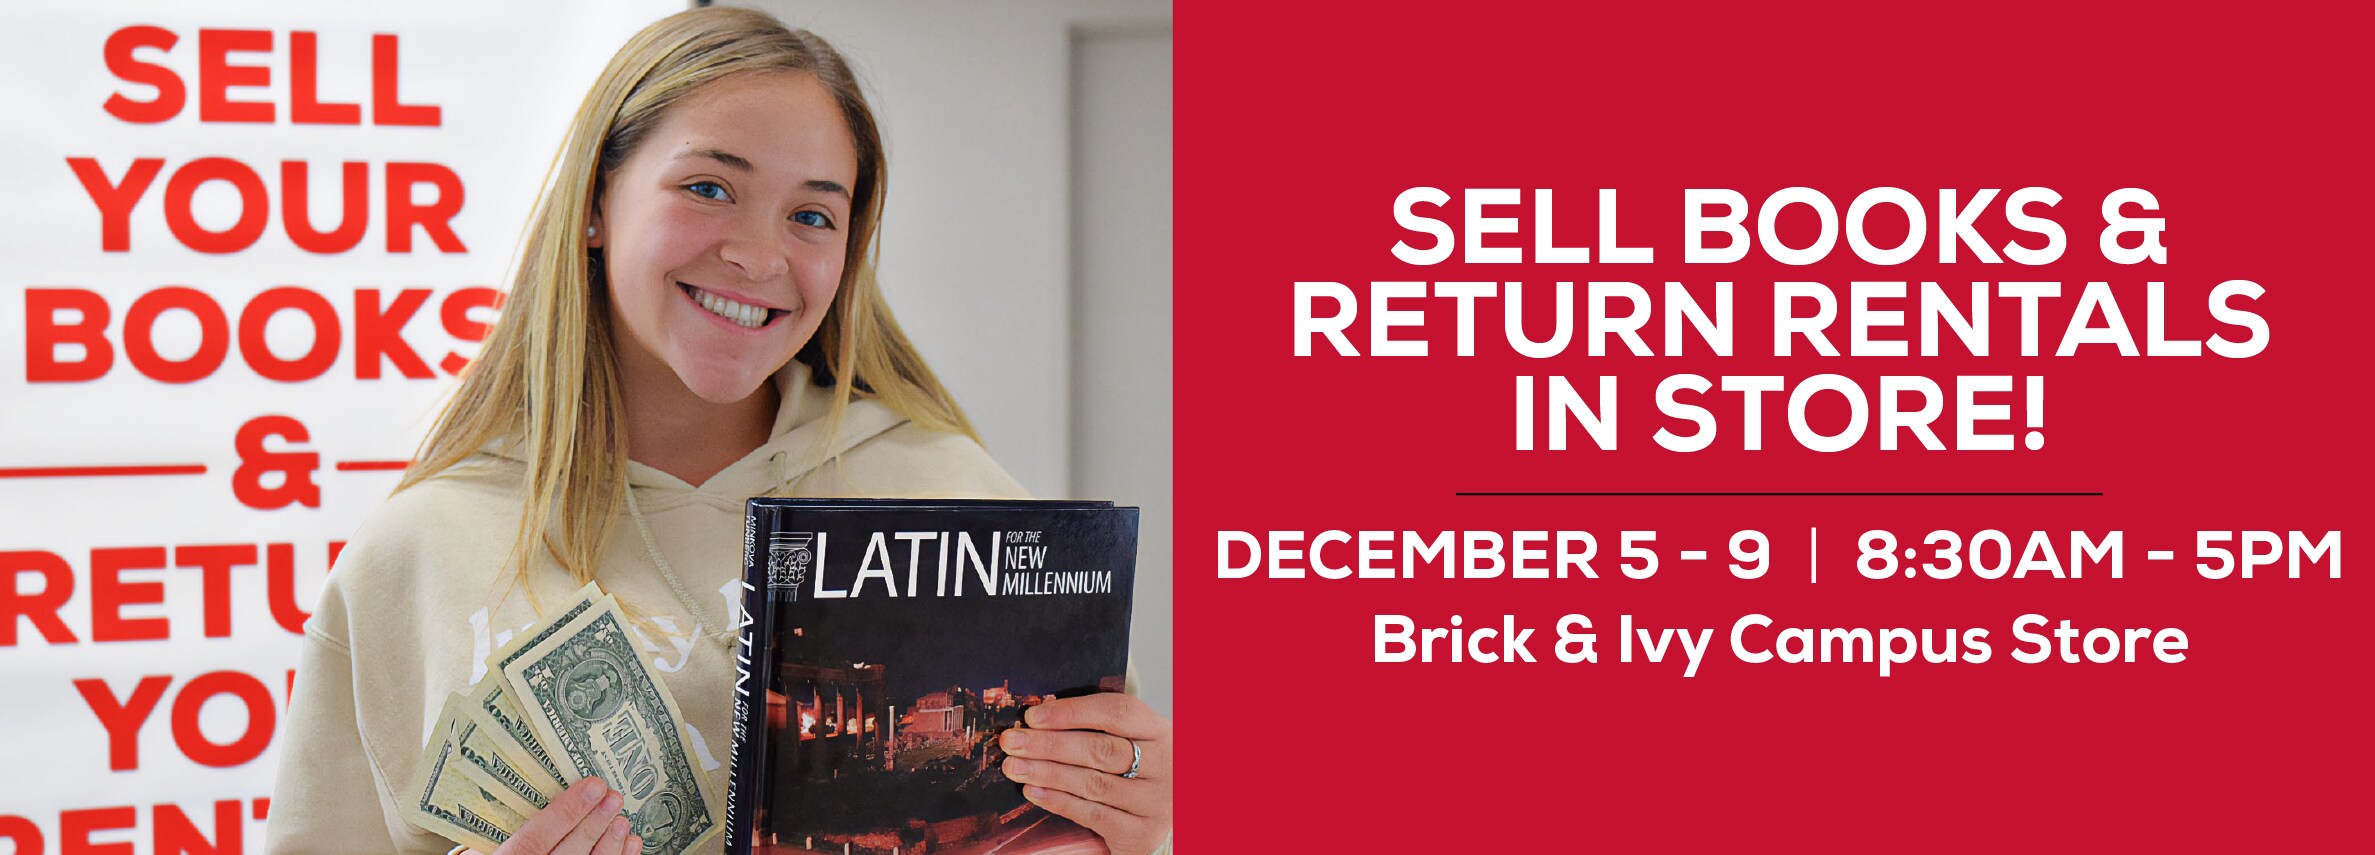 Sell books and return rentals in store! December 5 - 9. 8:30am to 5 pm at the Brick & Ivy Campus Store.